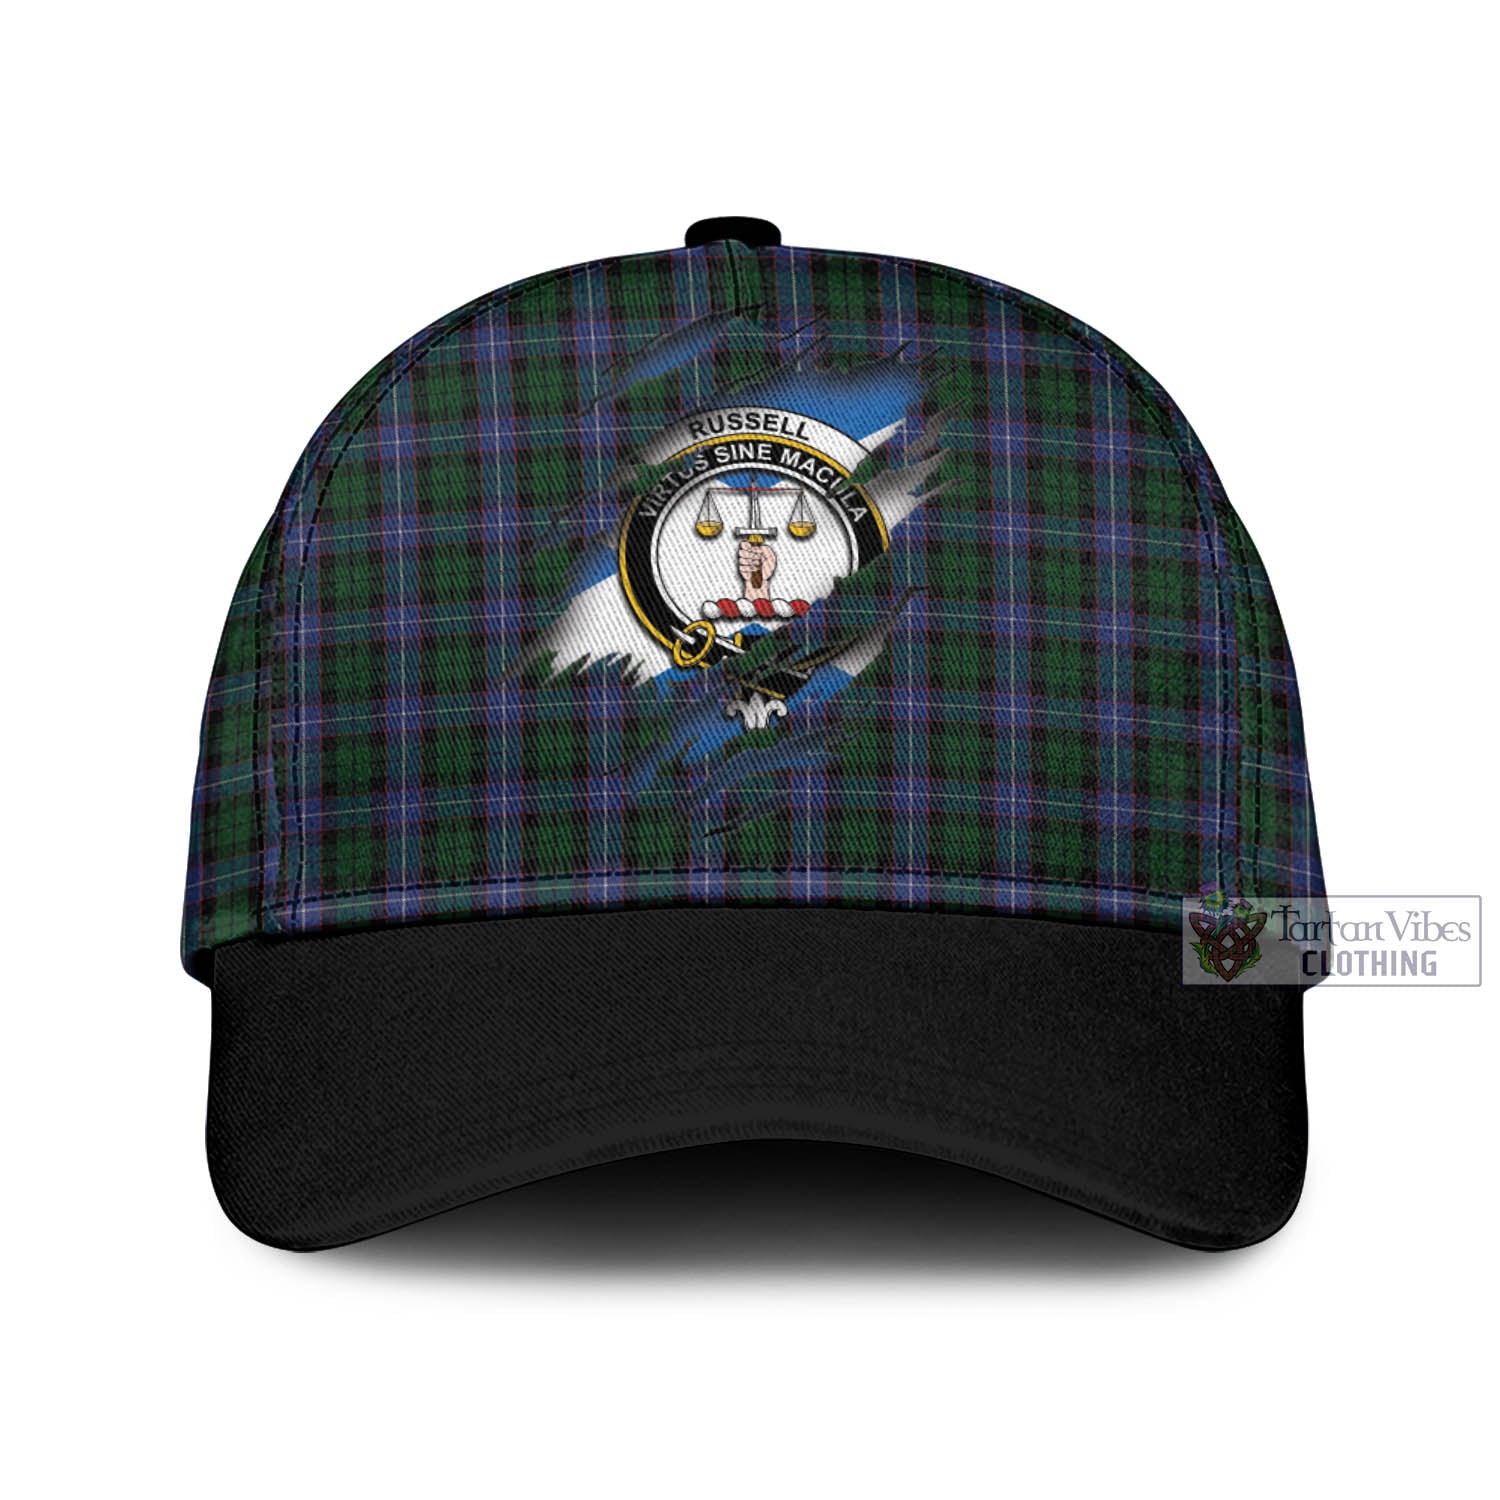 Tartan Vibes Clothing Russell or Mitchell or Hunter or Galbraith Tartan Classic Cap with Family Crest In Me Style